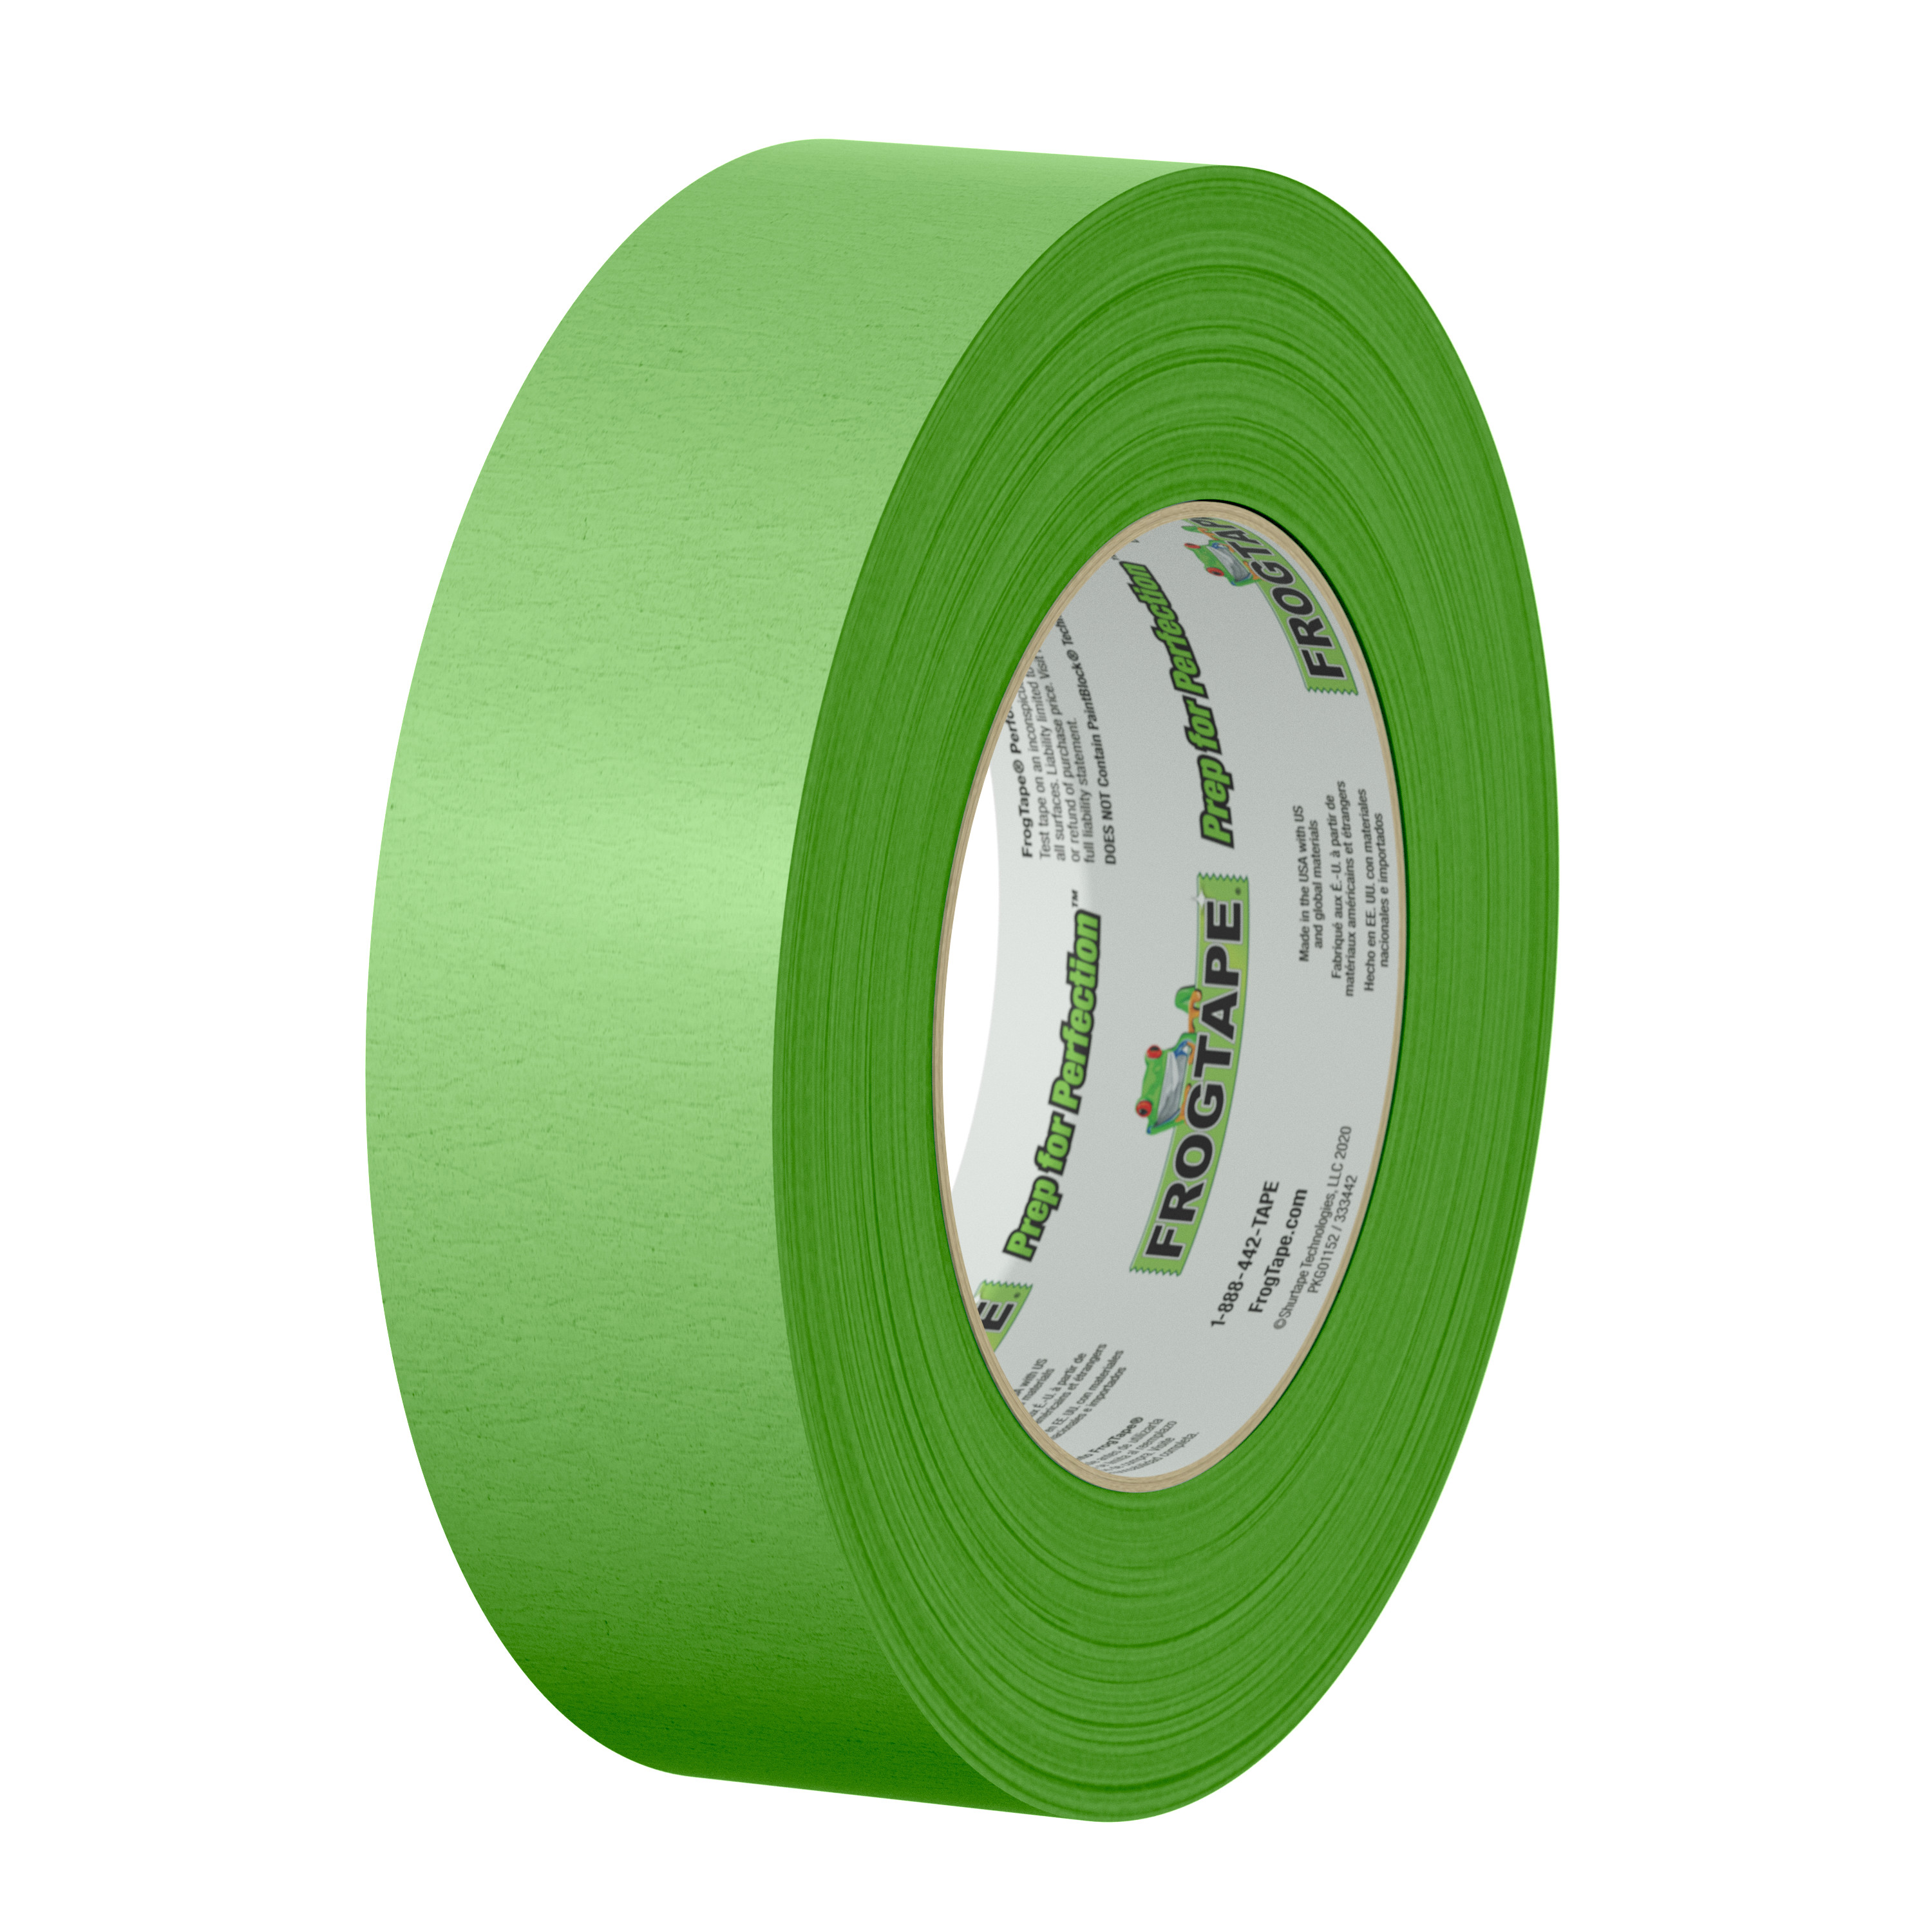 FrogTape 1.41 in. x 60 yd. Green Multi-Surface Painter's Tape, Pack 